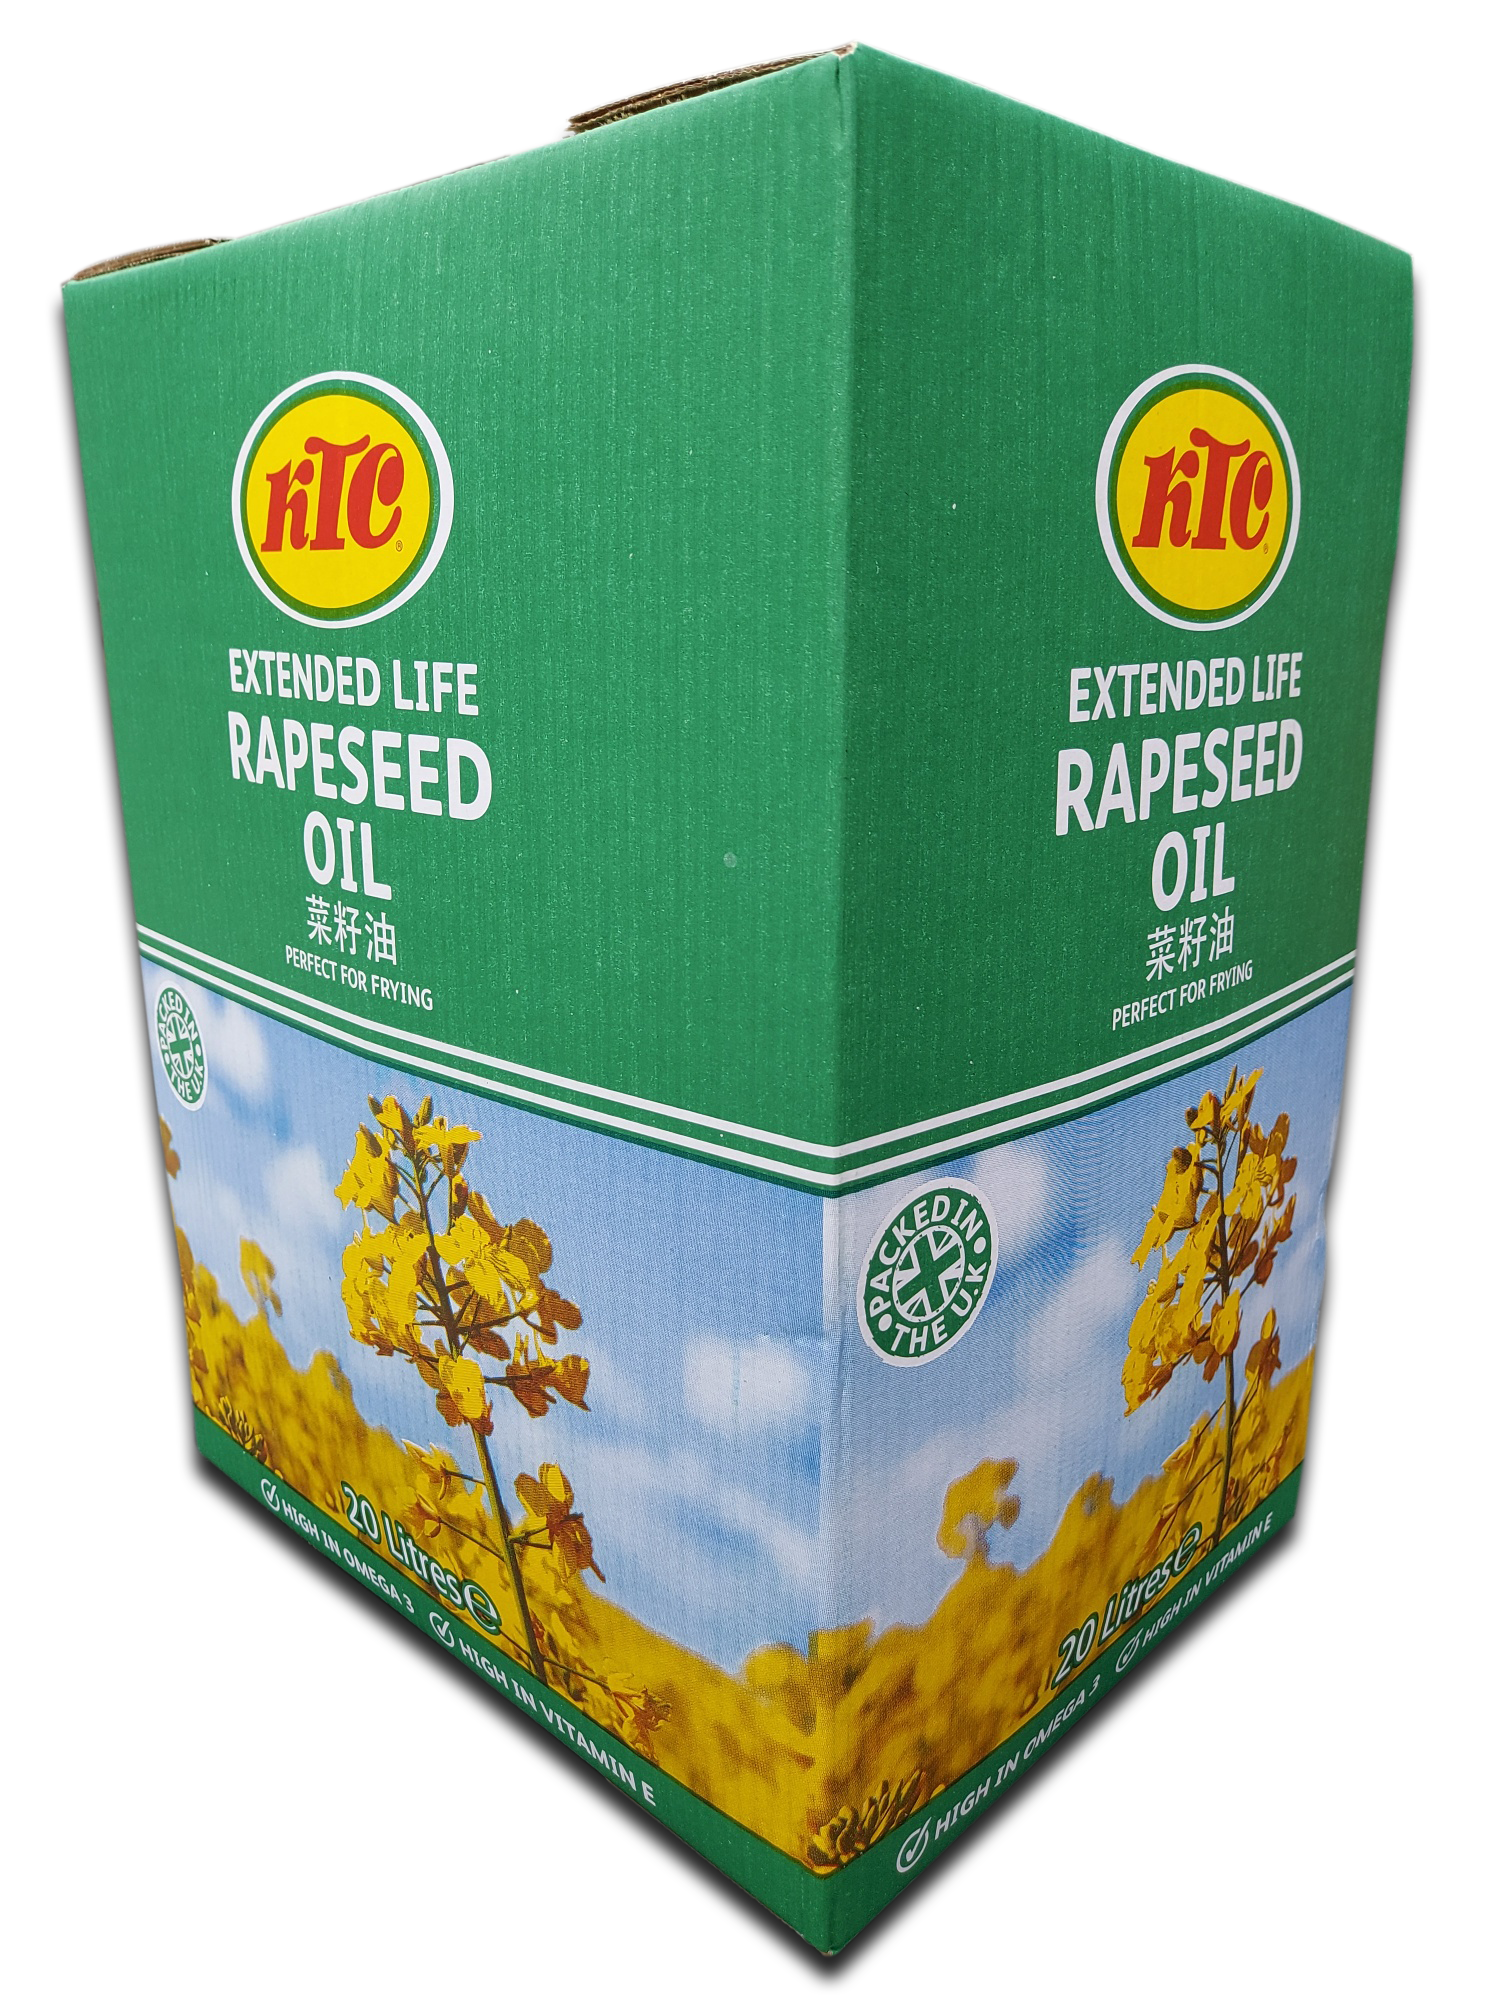 KTC extended life Rapeseed oil image